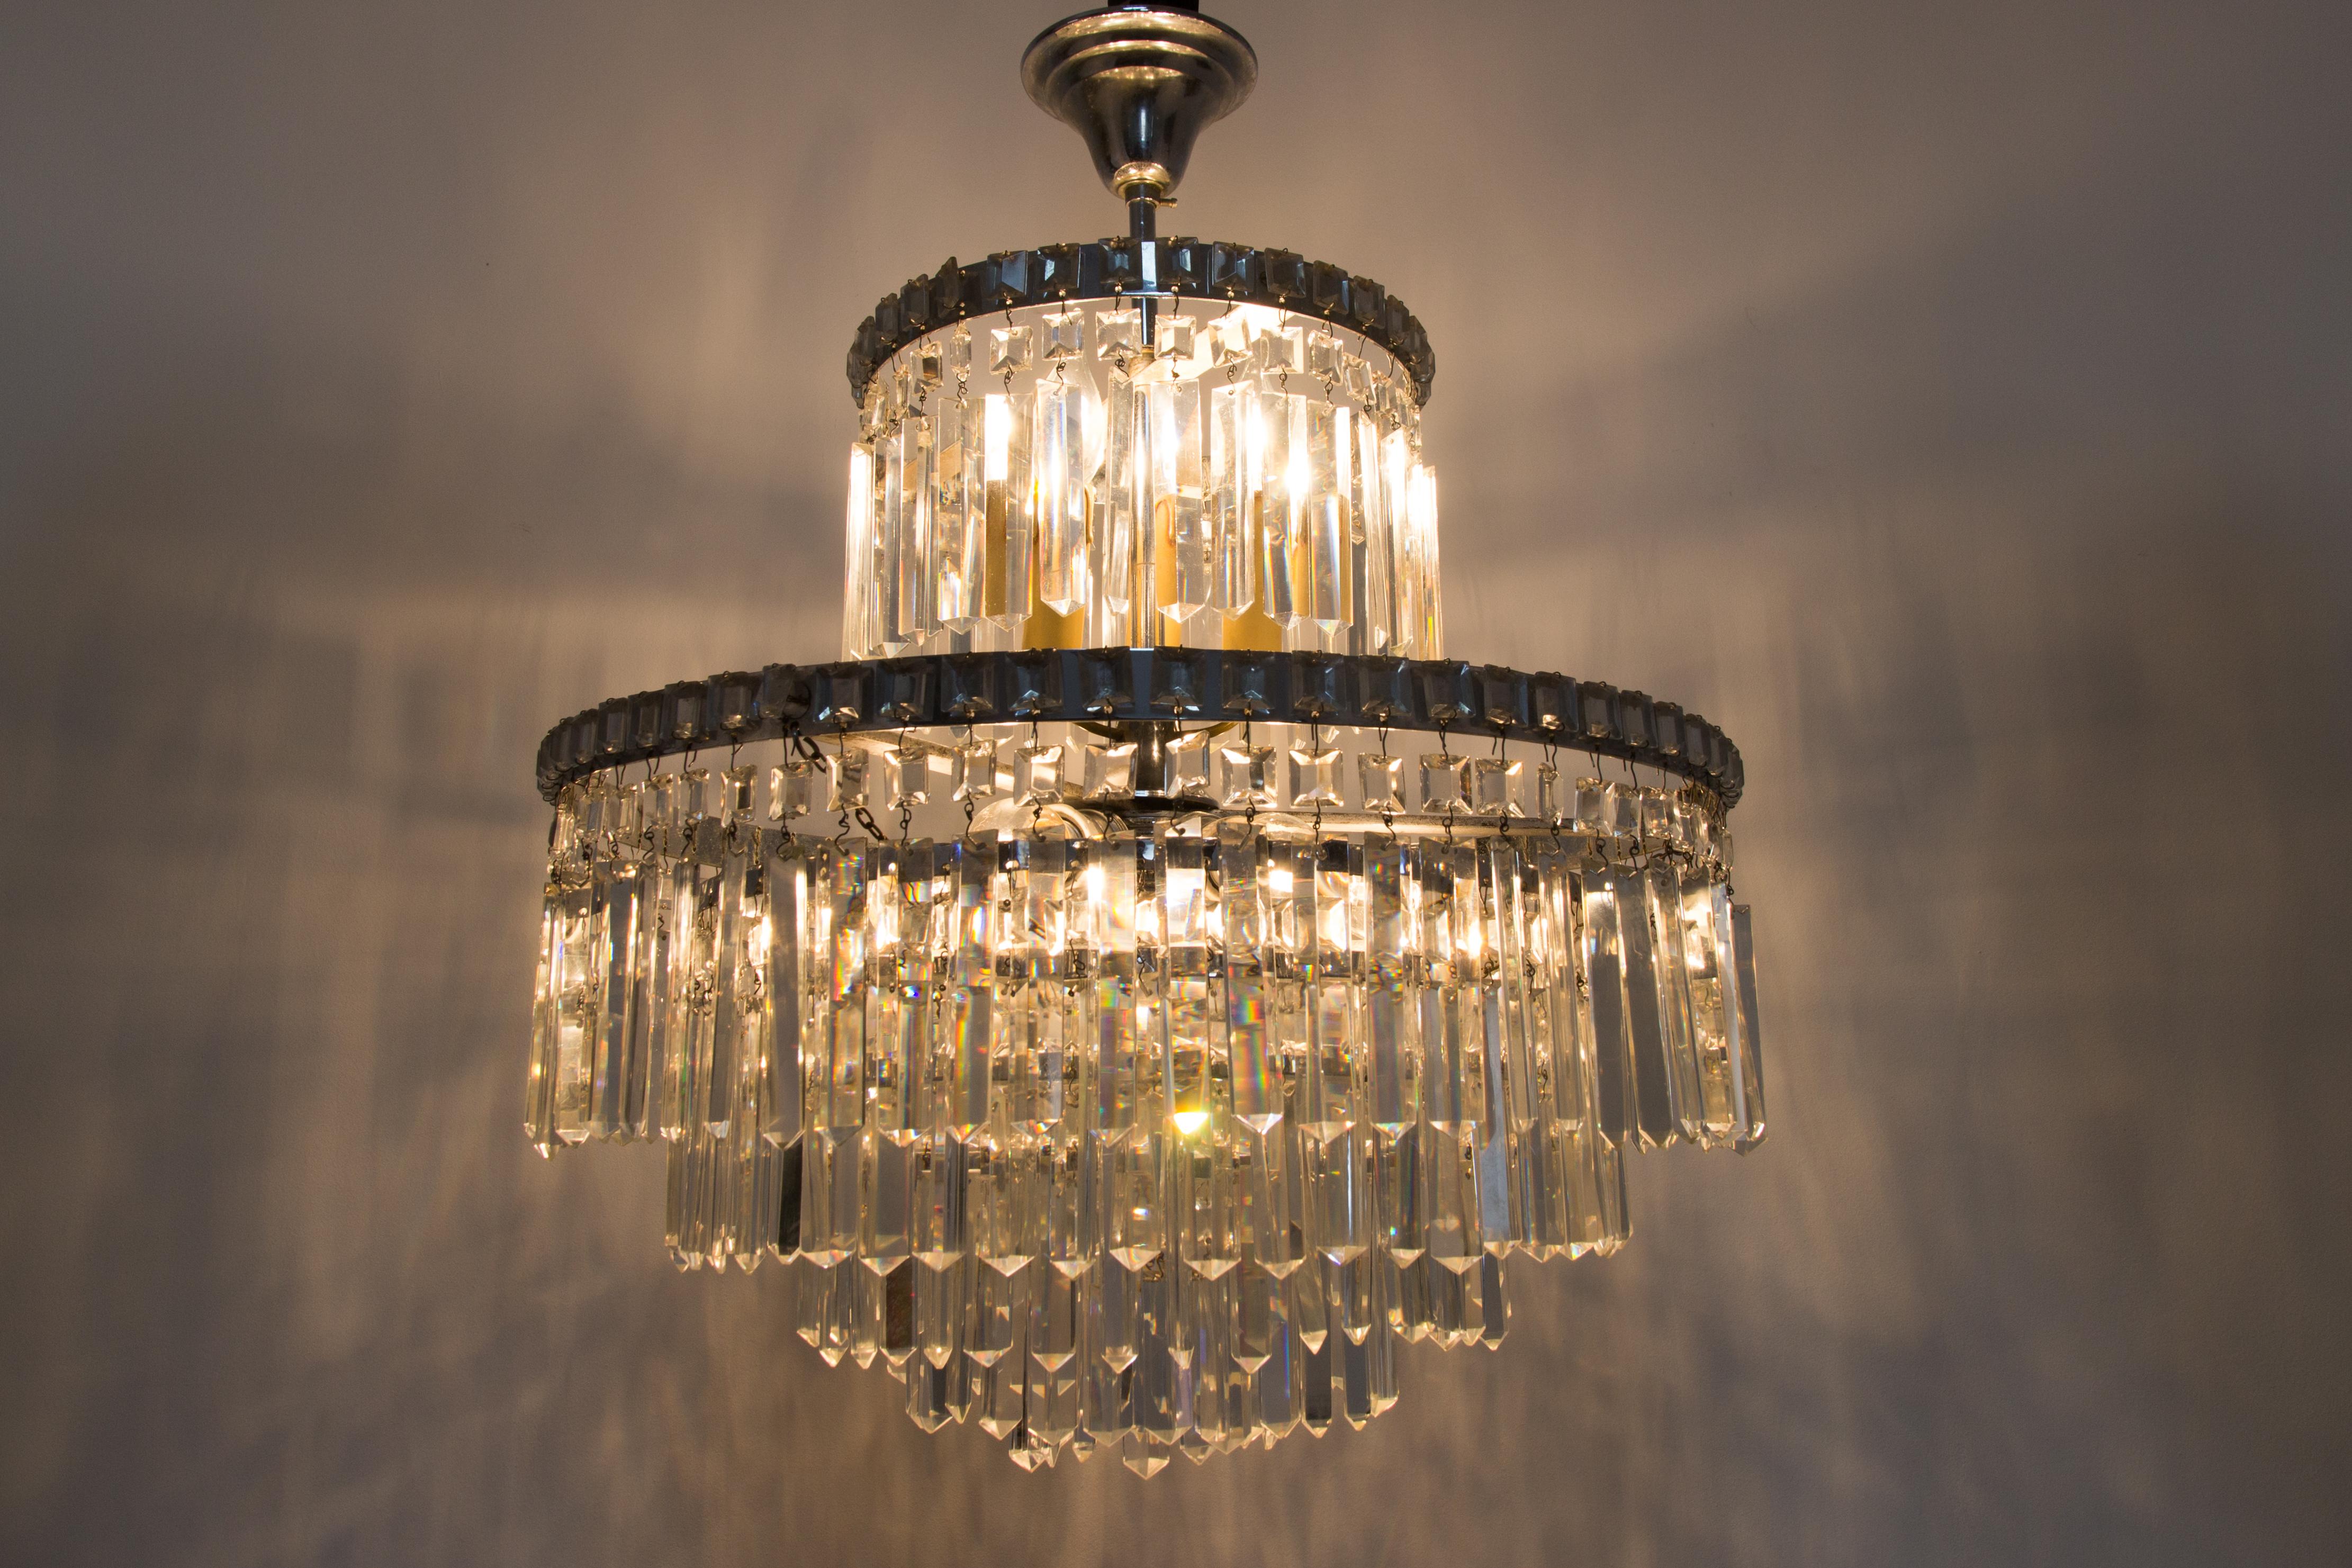 Beautiful Mid-Century five tier crystal chandelier, bronze frame. In total, the chandelier has 568 crystals, including: 219 large crystals, 14 medium sized crystals, 335 small crystals.
Nine original sockets with new wiring. Six sockets for E 27